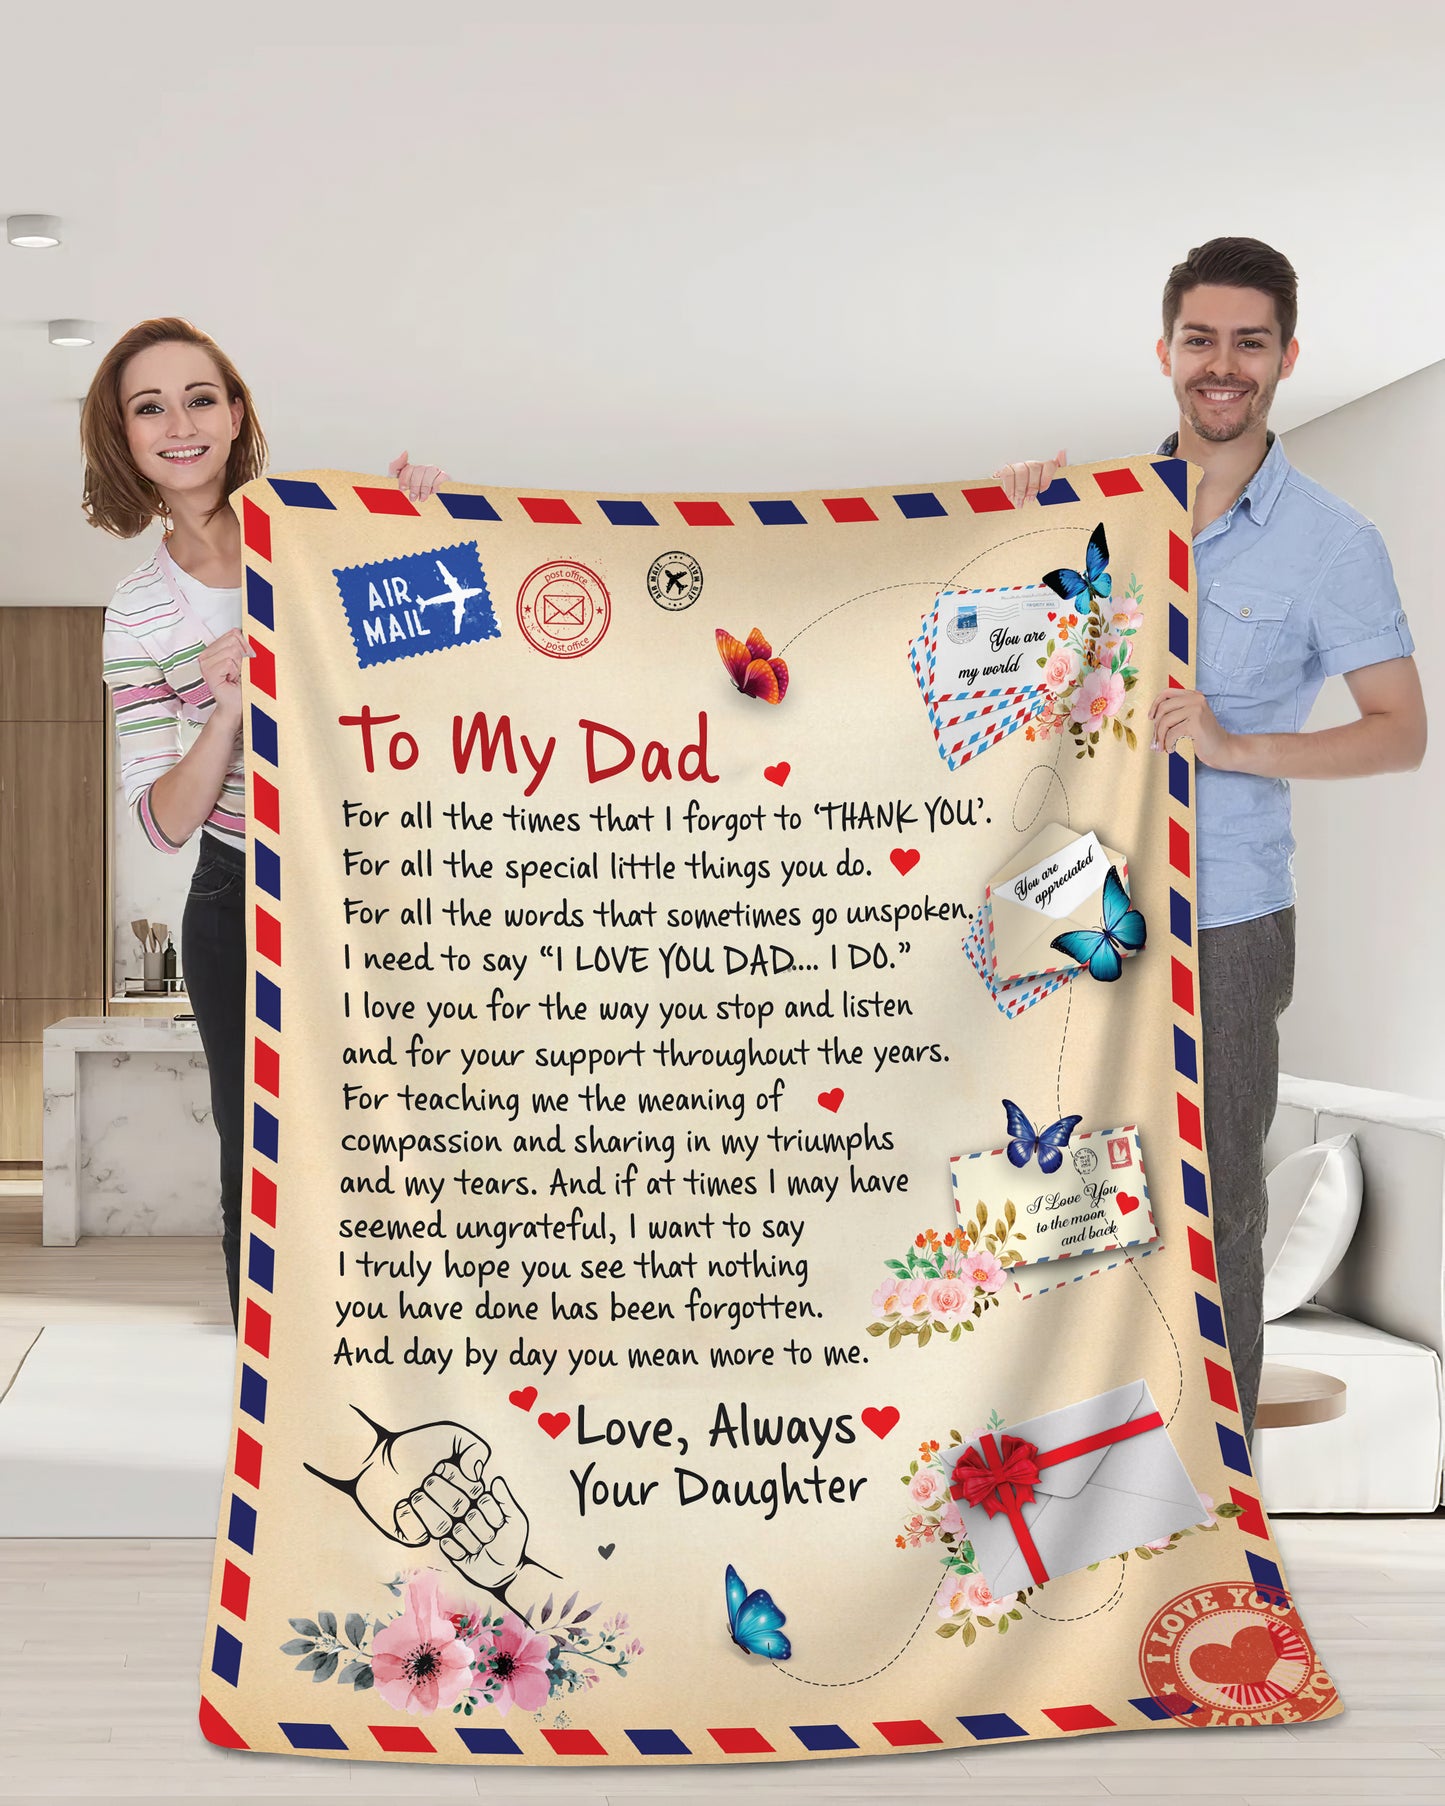 Dad - Giant Post Card Blanket